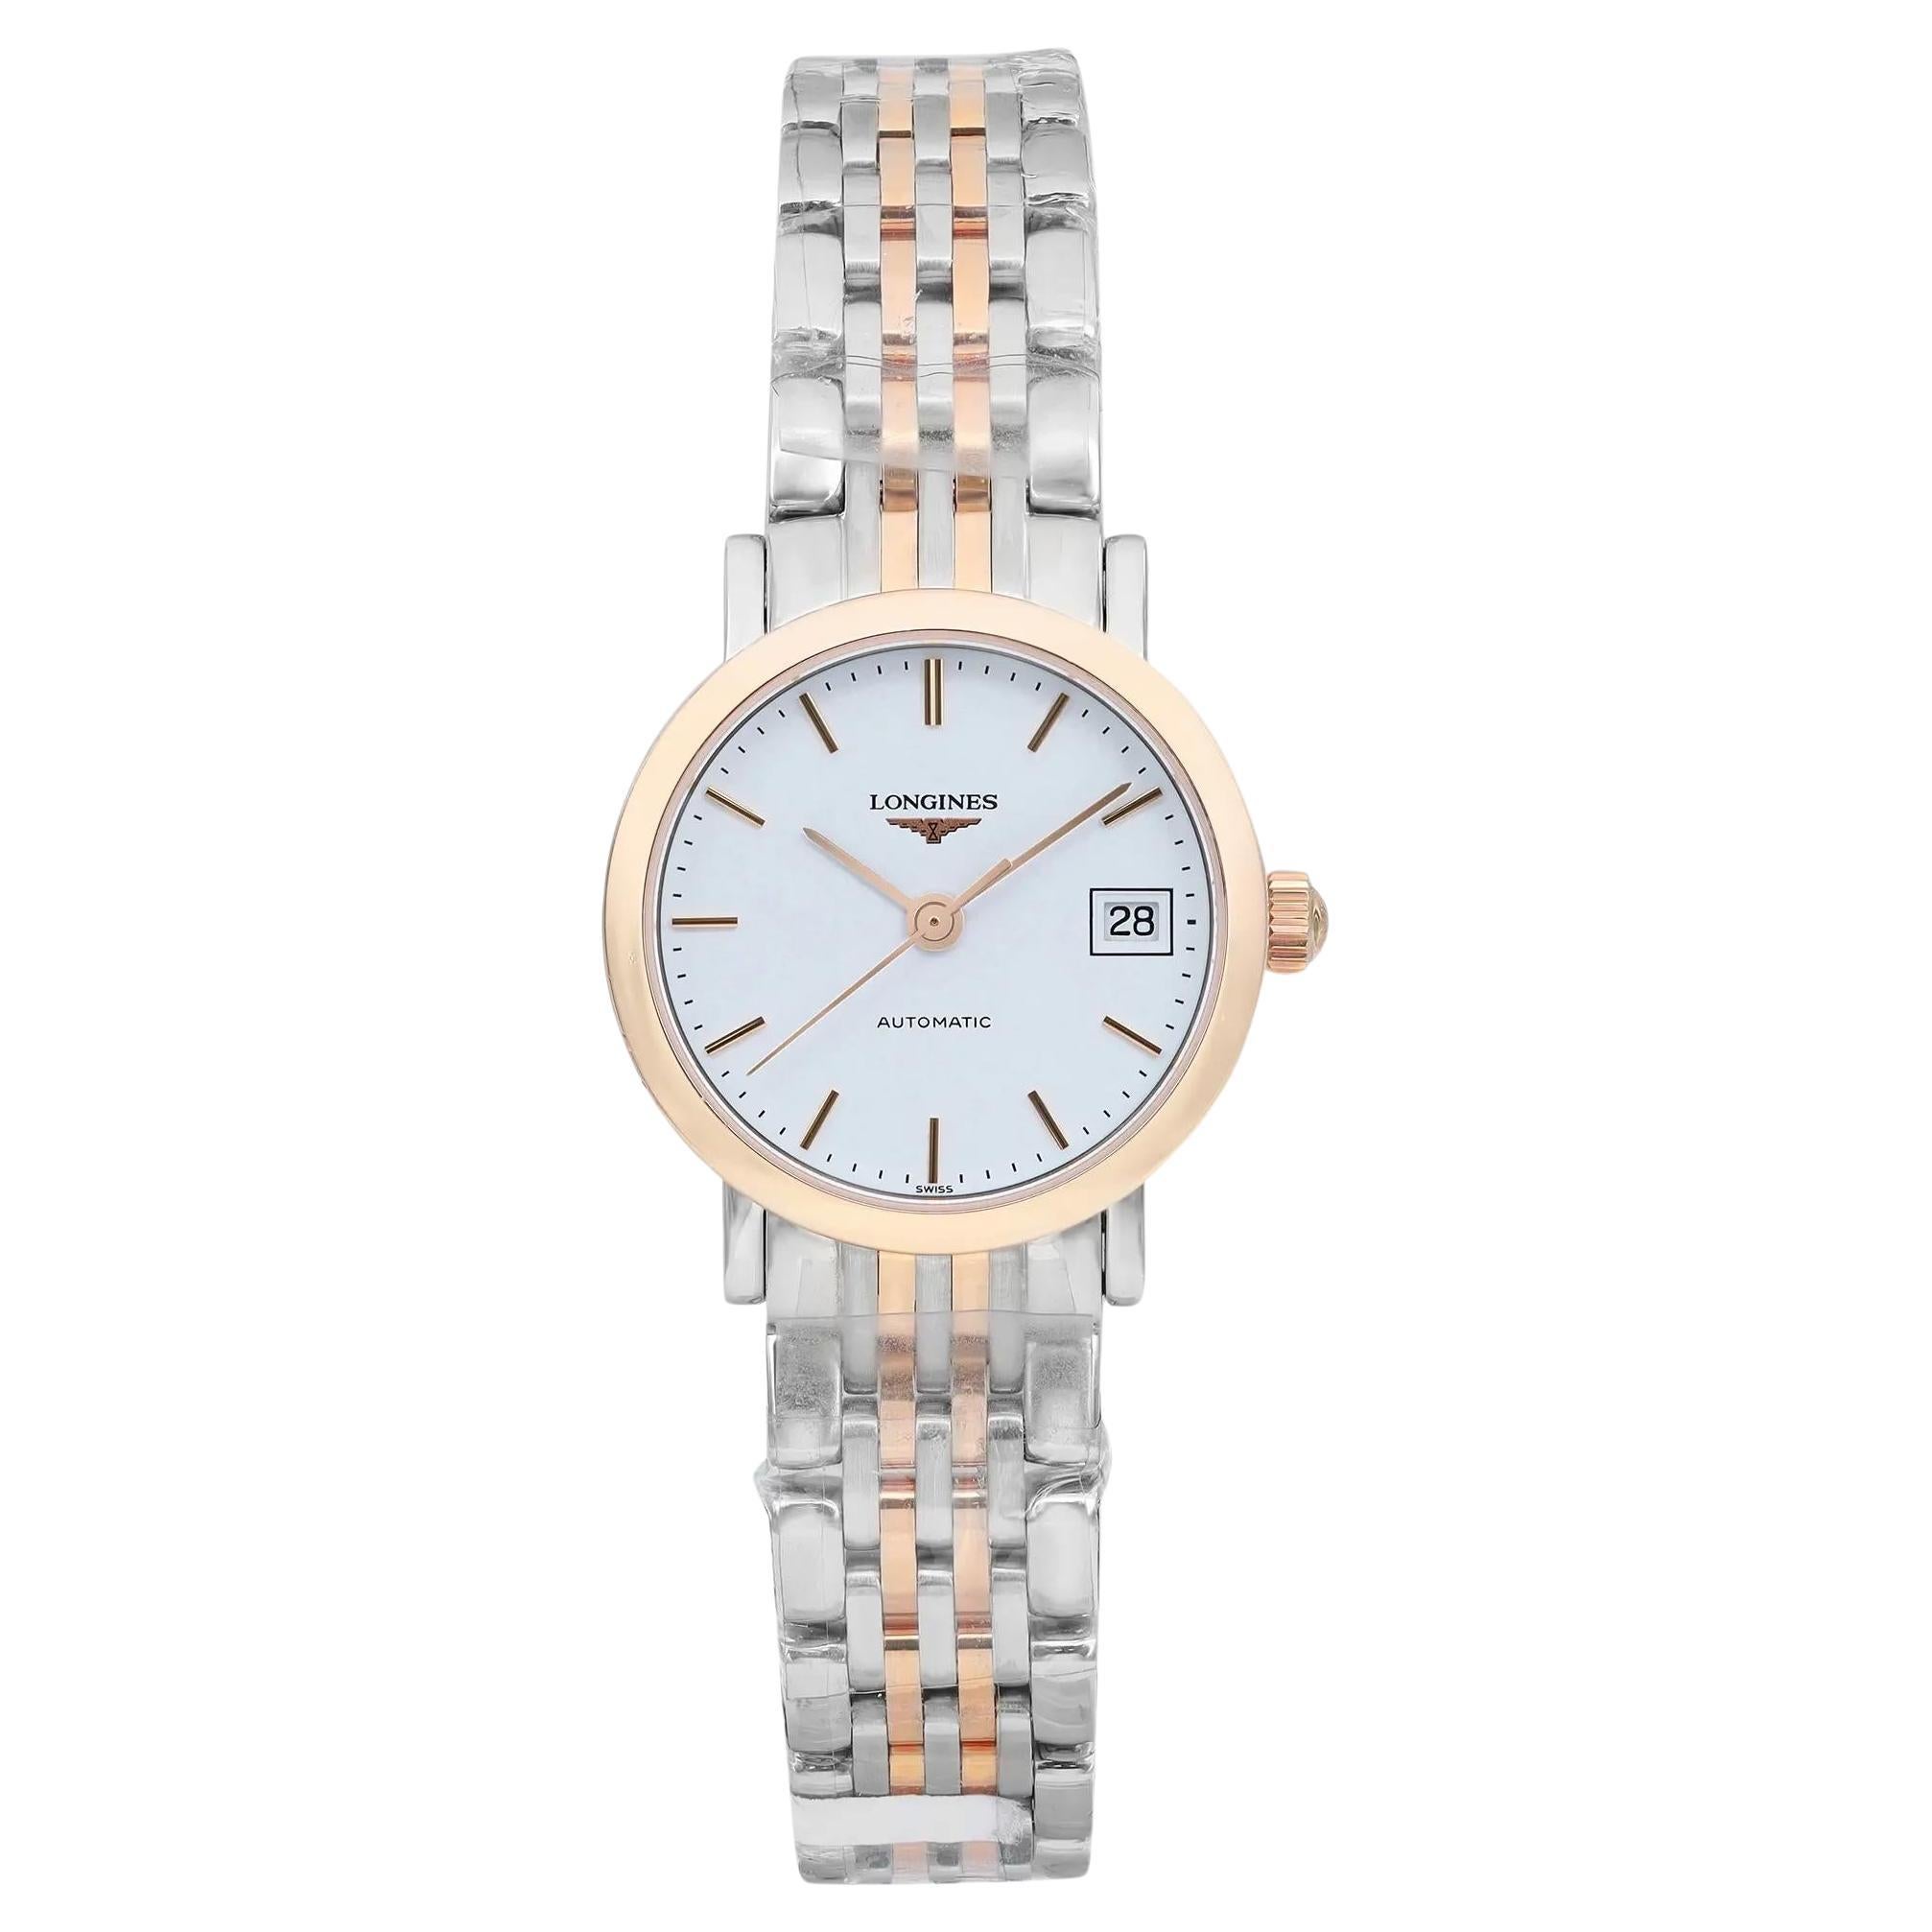 Longines Elegant 25.5mm Two-Tone White Dial Automatic Ladies Watch L4.309.5.12.7 For Sale